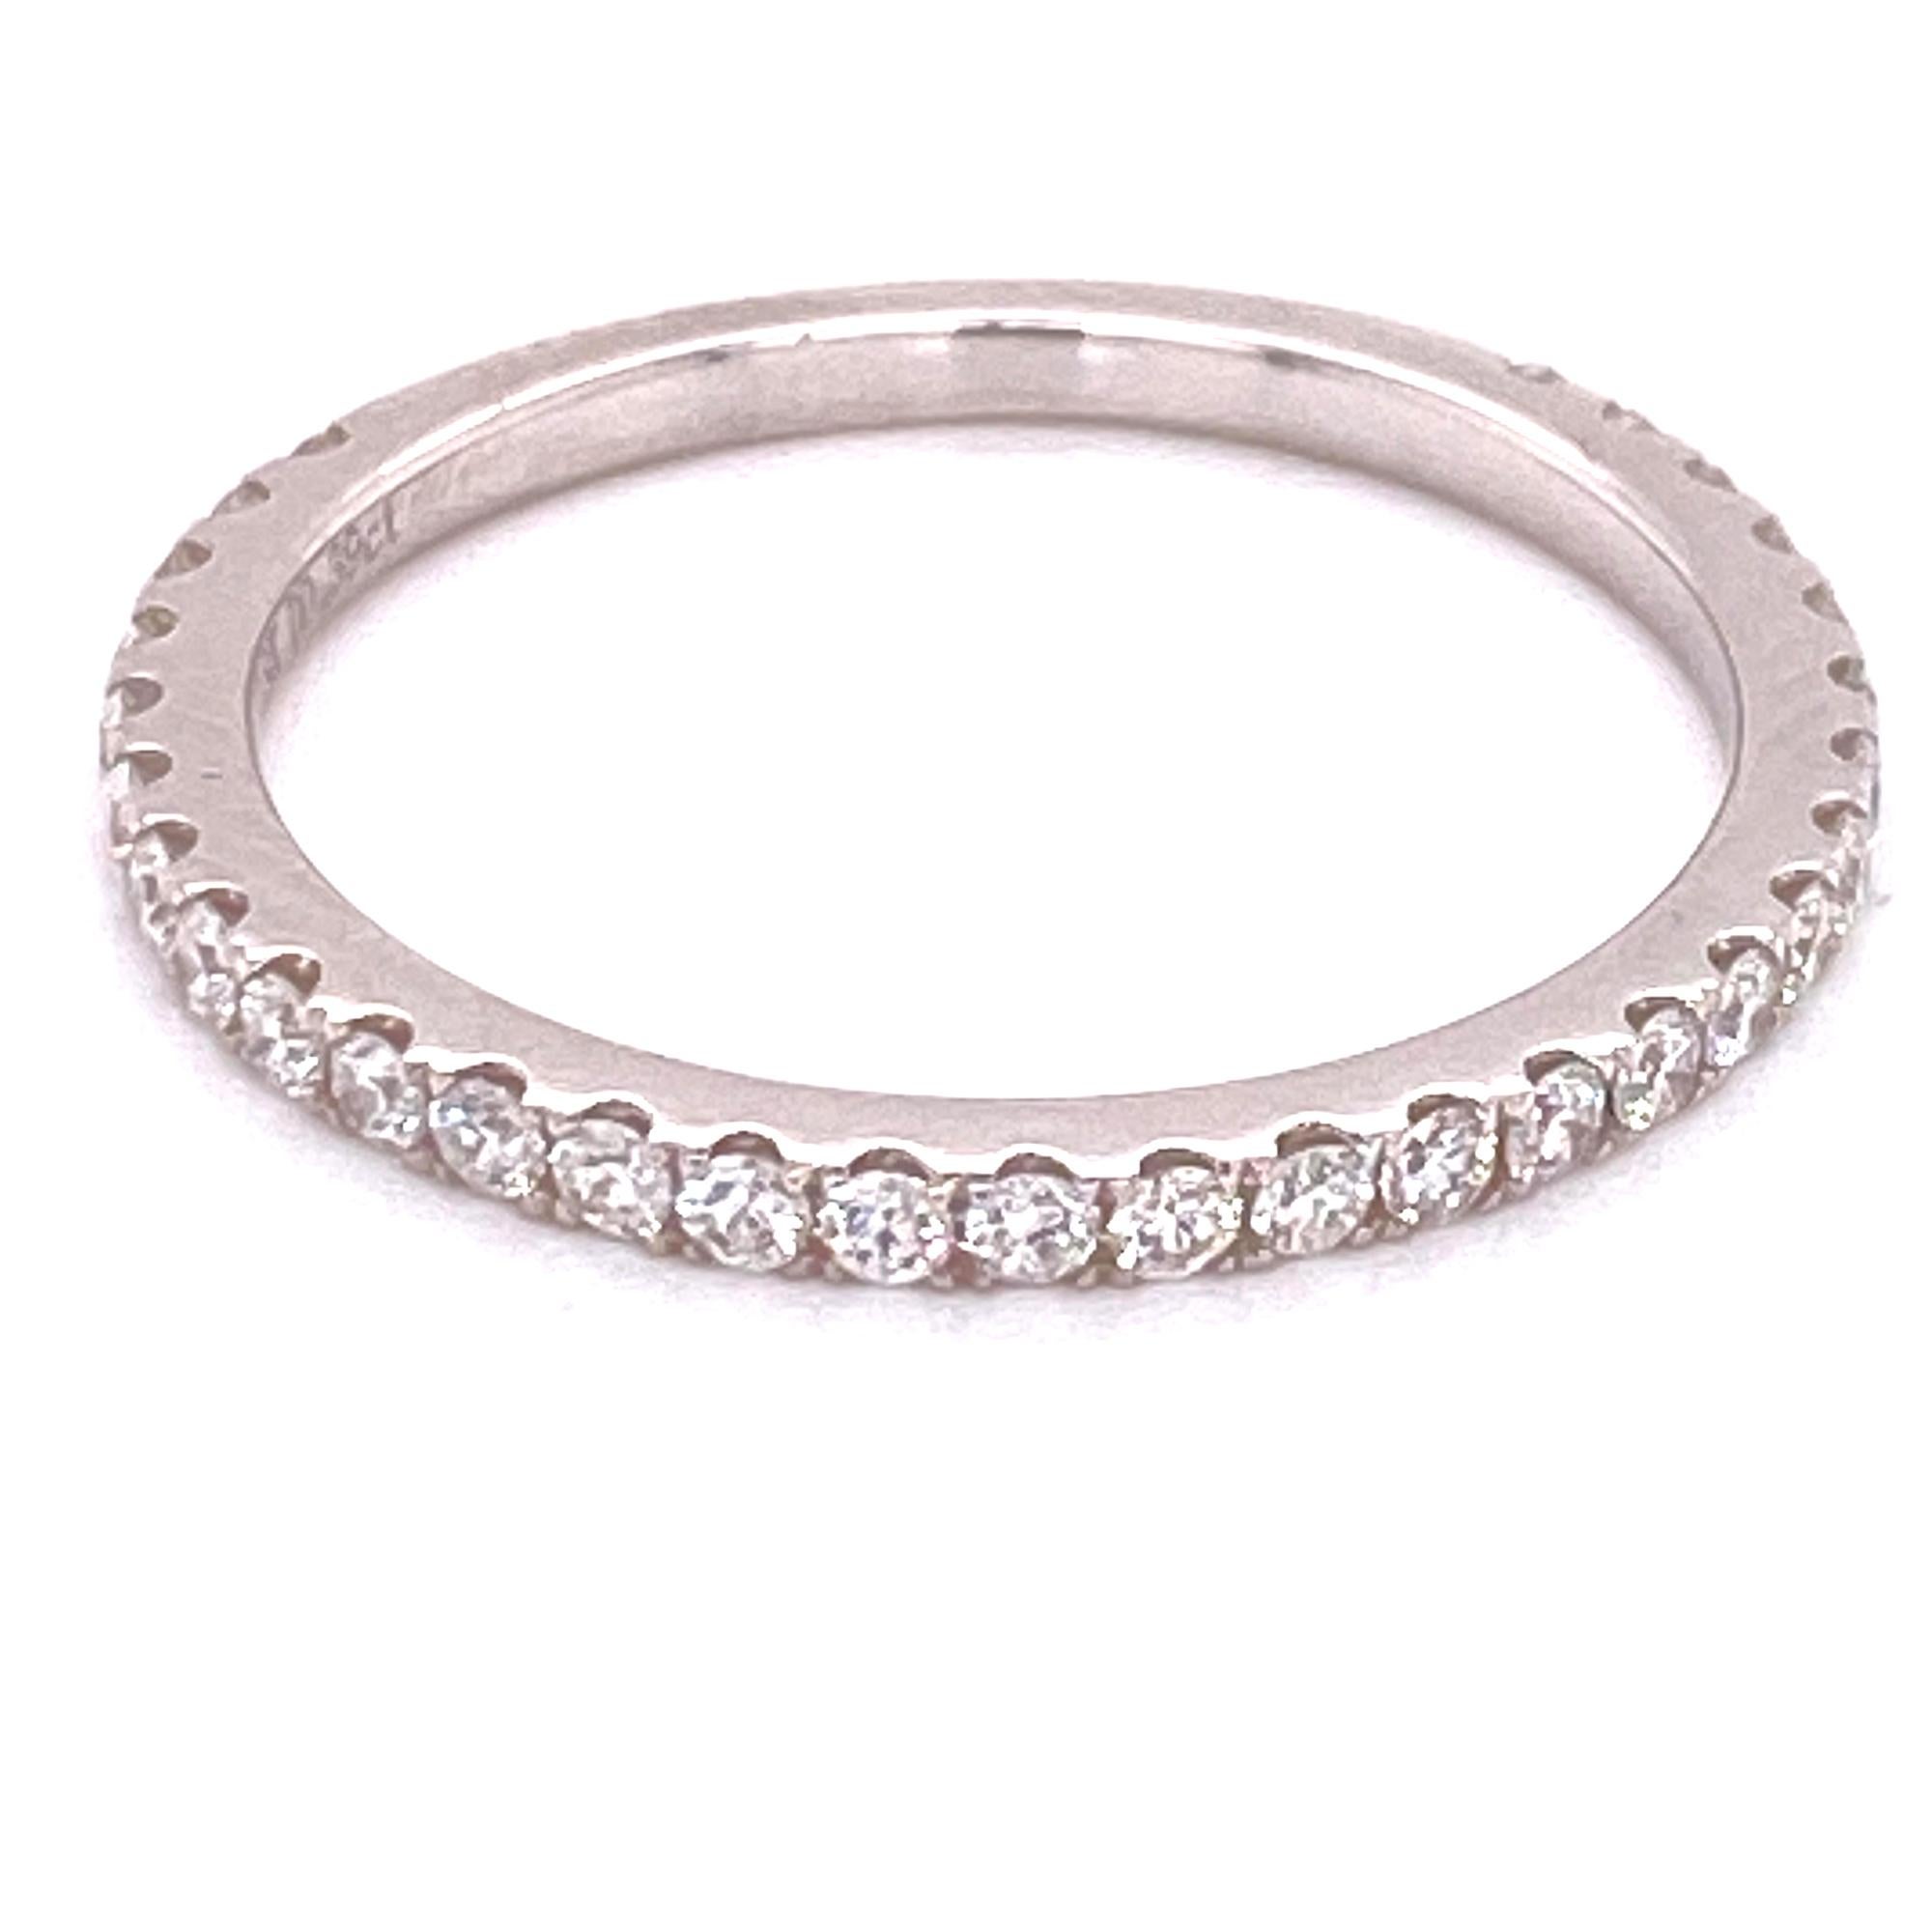 Diamond band ring fashioned in 18 karat white gold. The round brilliant cut diamonds are prong set 3/4 of the way around the band and weigh .40 carat total weight. The diamonds are graded G-H color and VS2-SI1 clarity. The thin band measures 1.5mm,